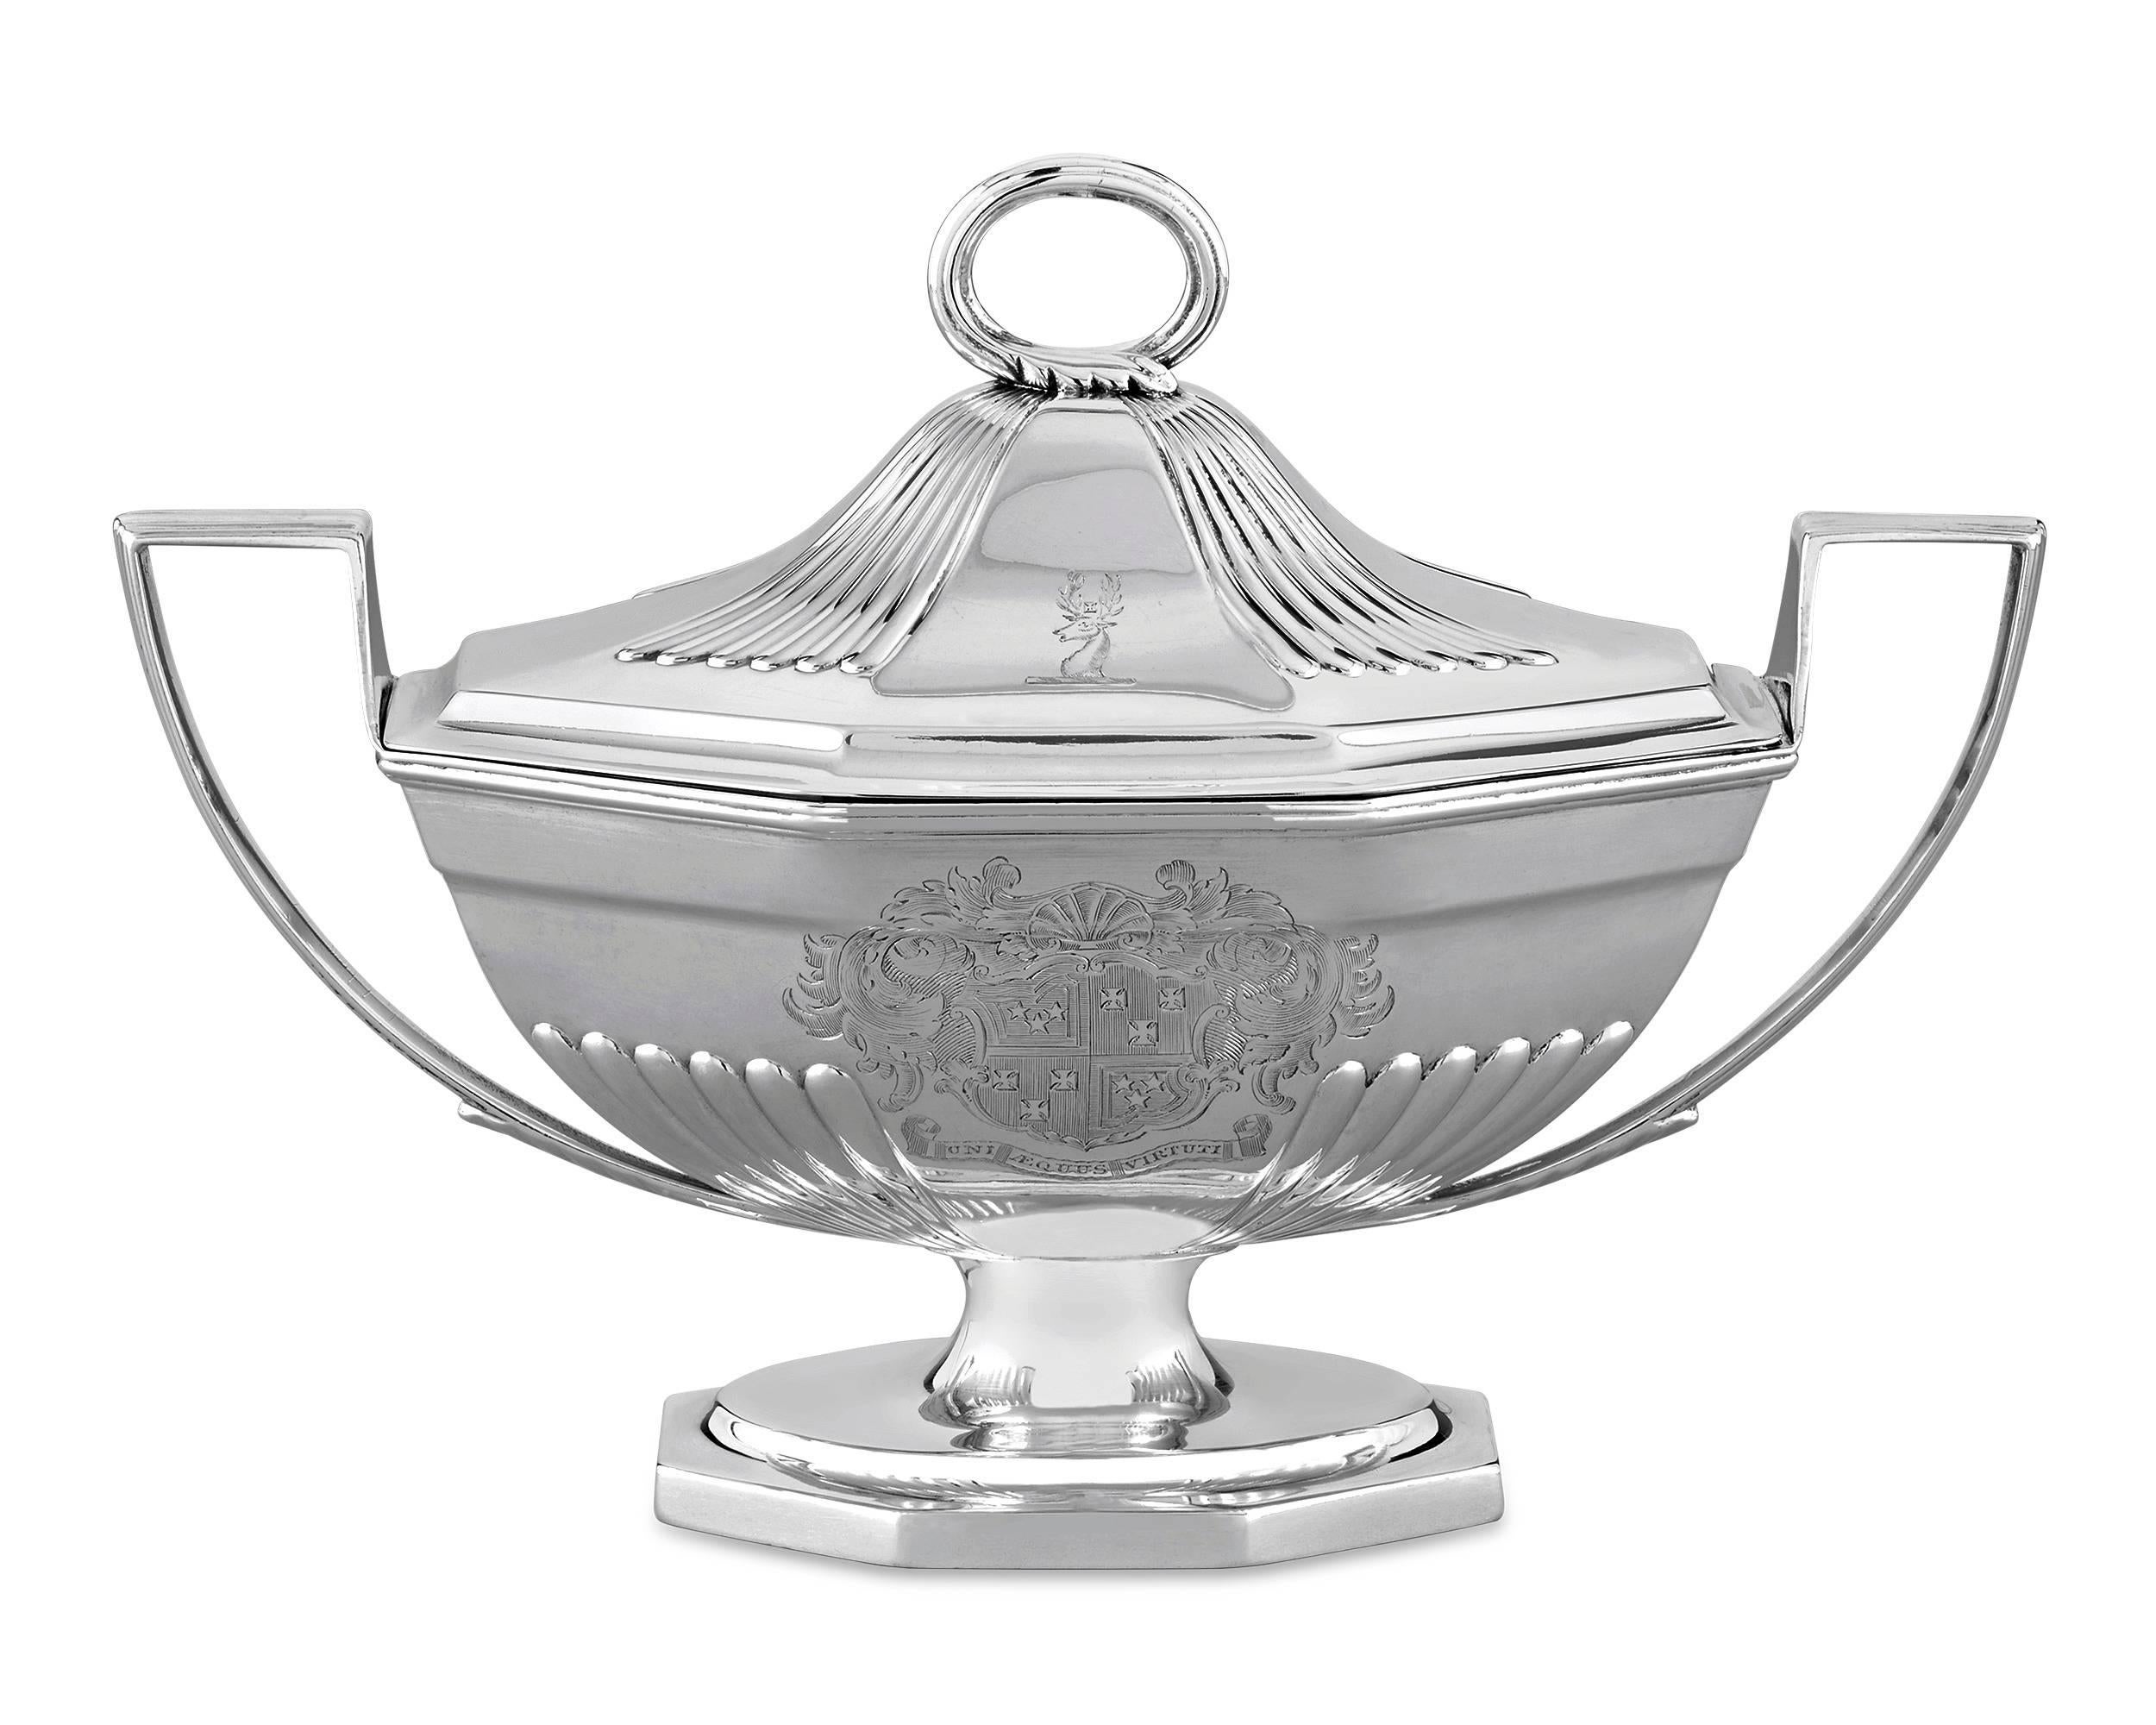 This rare and exceptional pair of silver sauce tureens was crafted by the legendary Georgian silversmith Paul Storr. Complete with their original matching covers, the tureens are striking examples of the neoclassical style that pervaded late